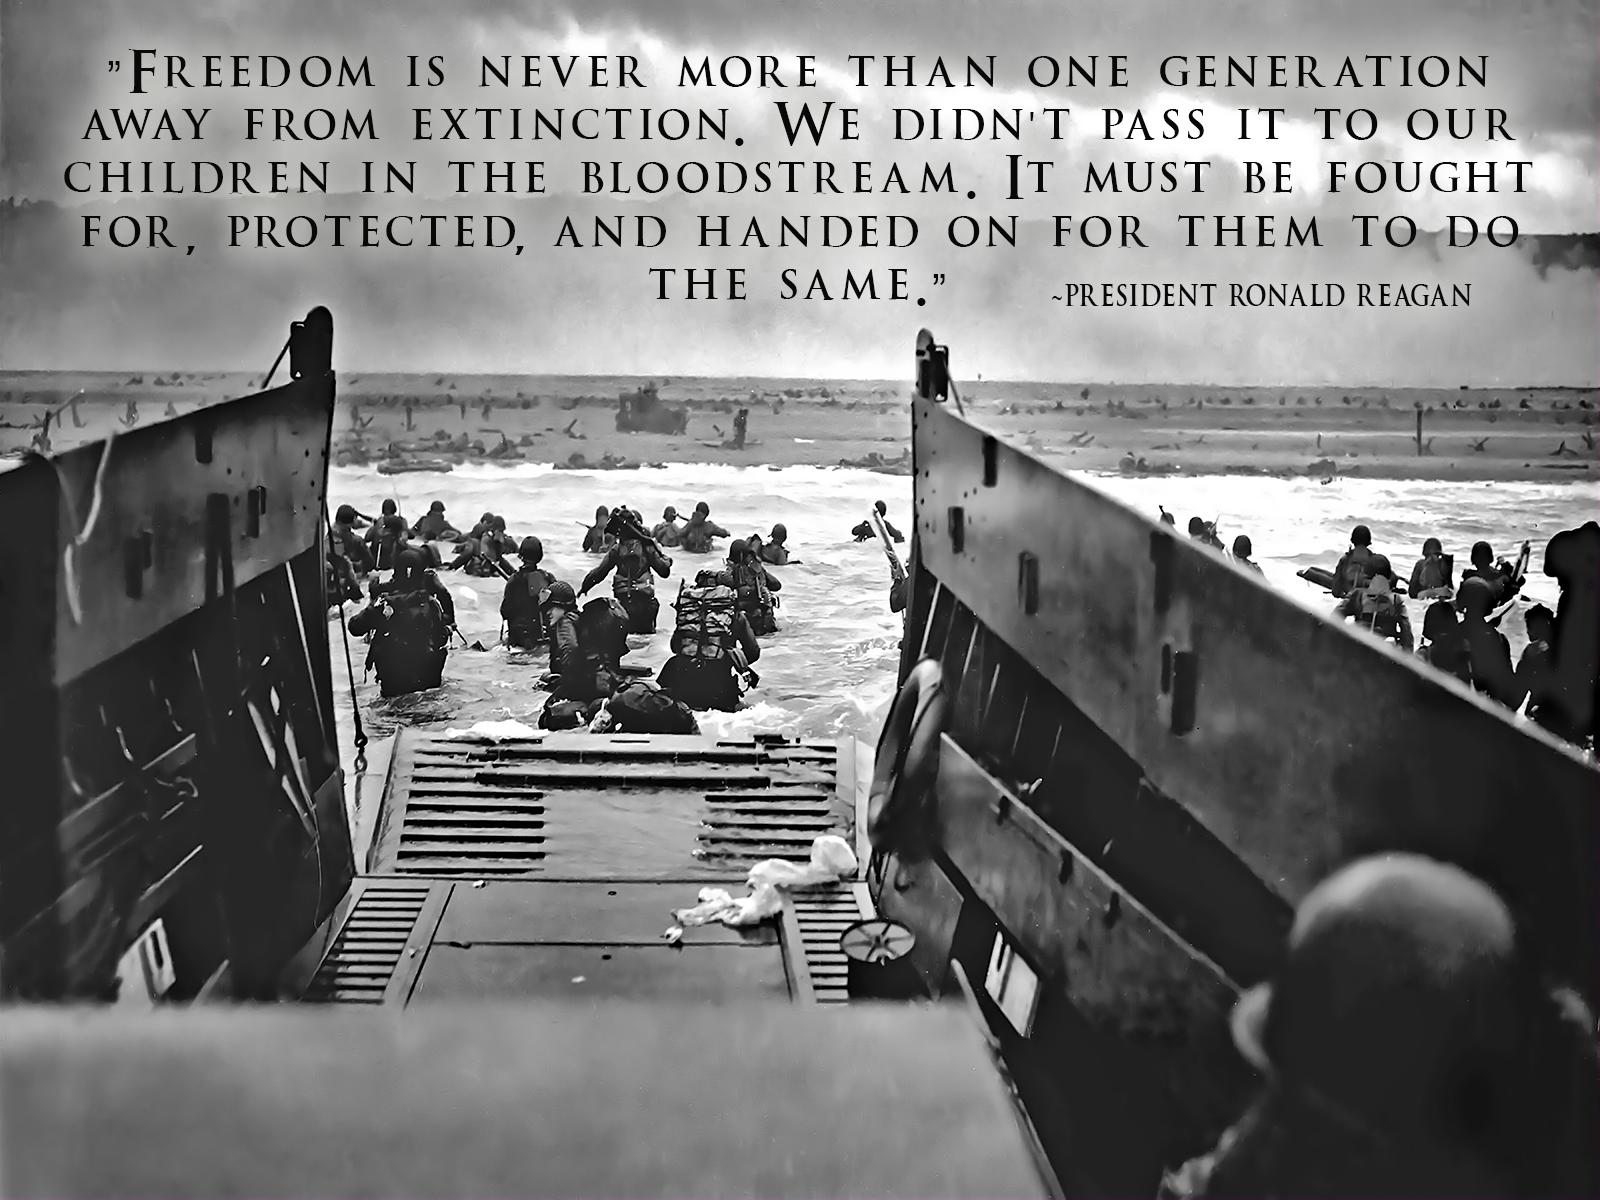 DutyHonorValor Motivation Poster with a Ronald Reagan quote. #DDAY #NORMANDY #WW2 #RONALDREAGAN #MILITARY #USA